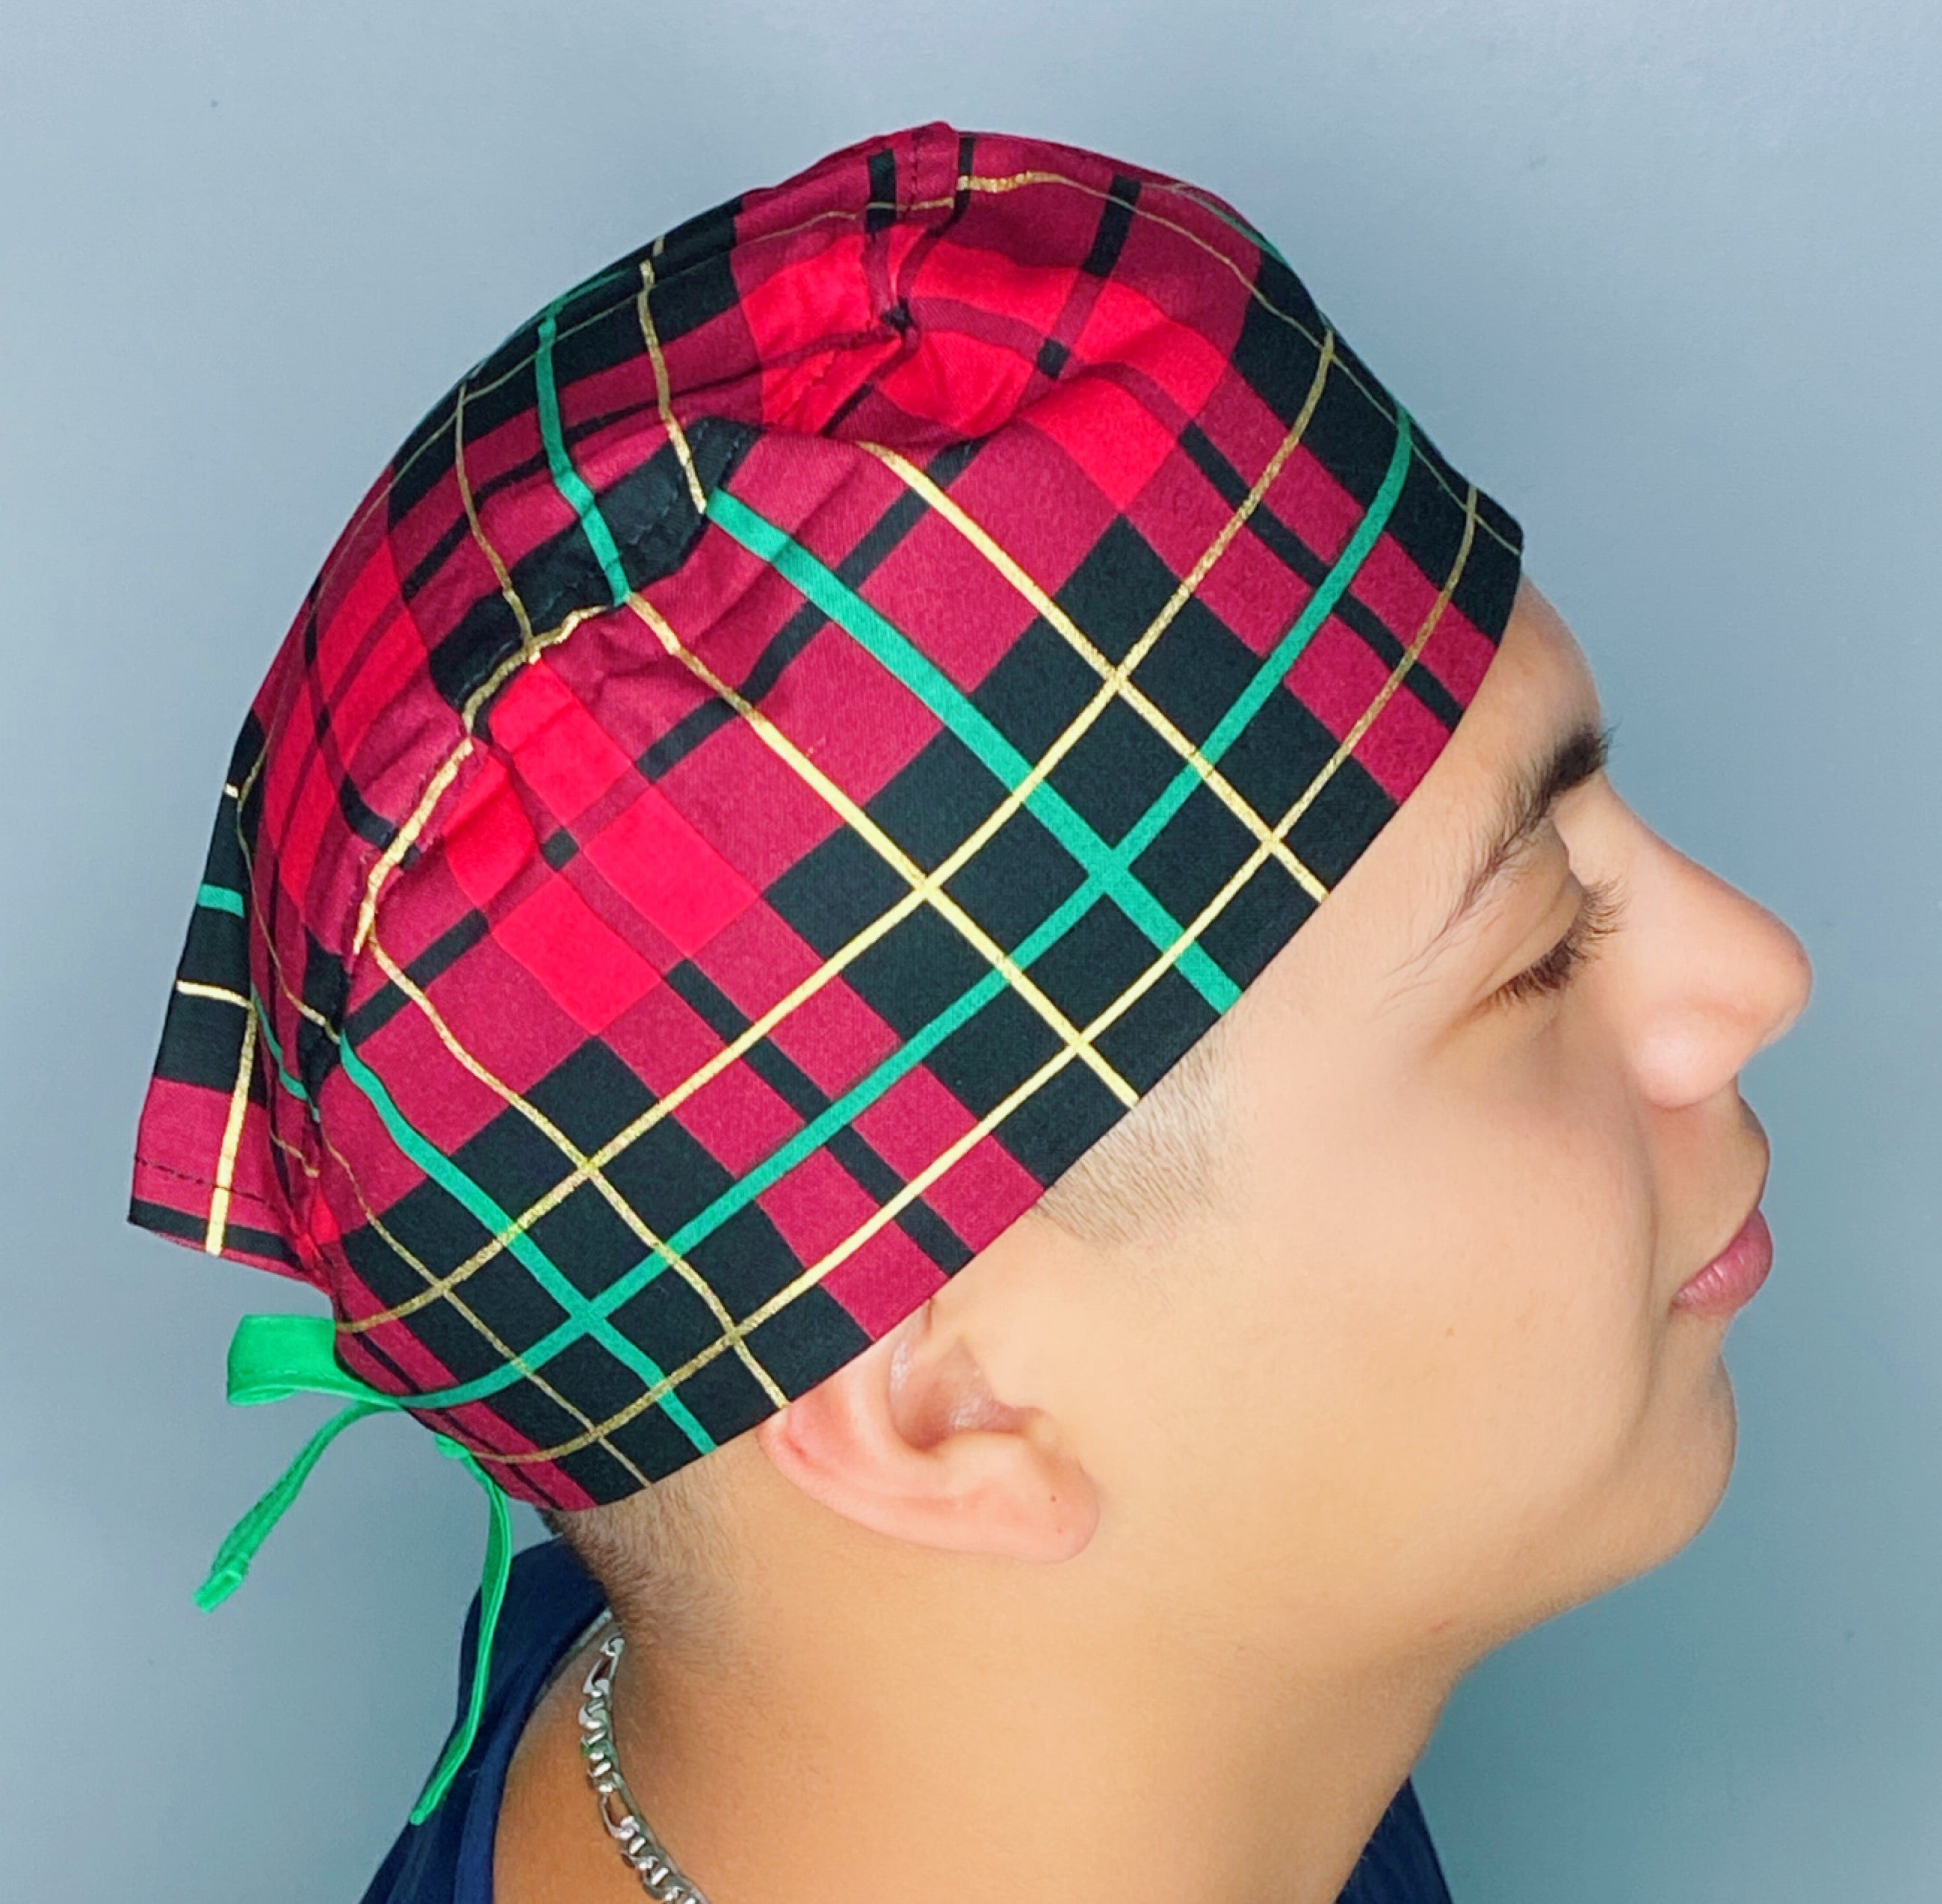 Red, Green & Gold Plaid Design Christmas/Winter themed Unisex Holiday Scrub Cap